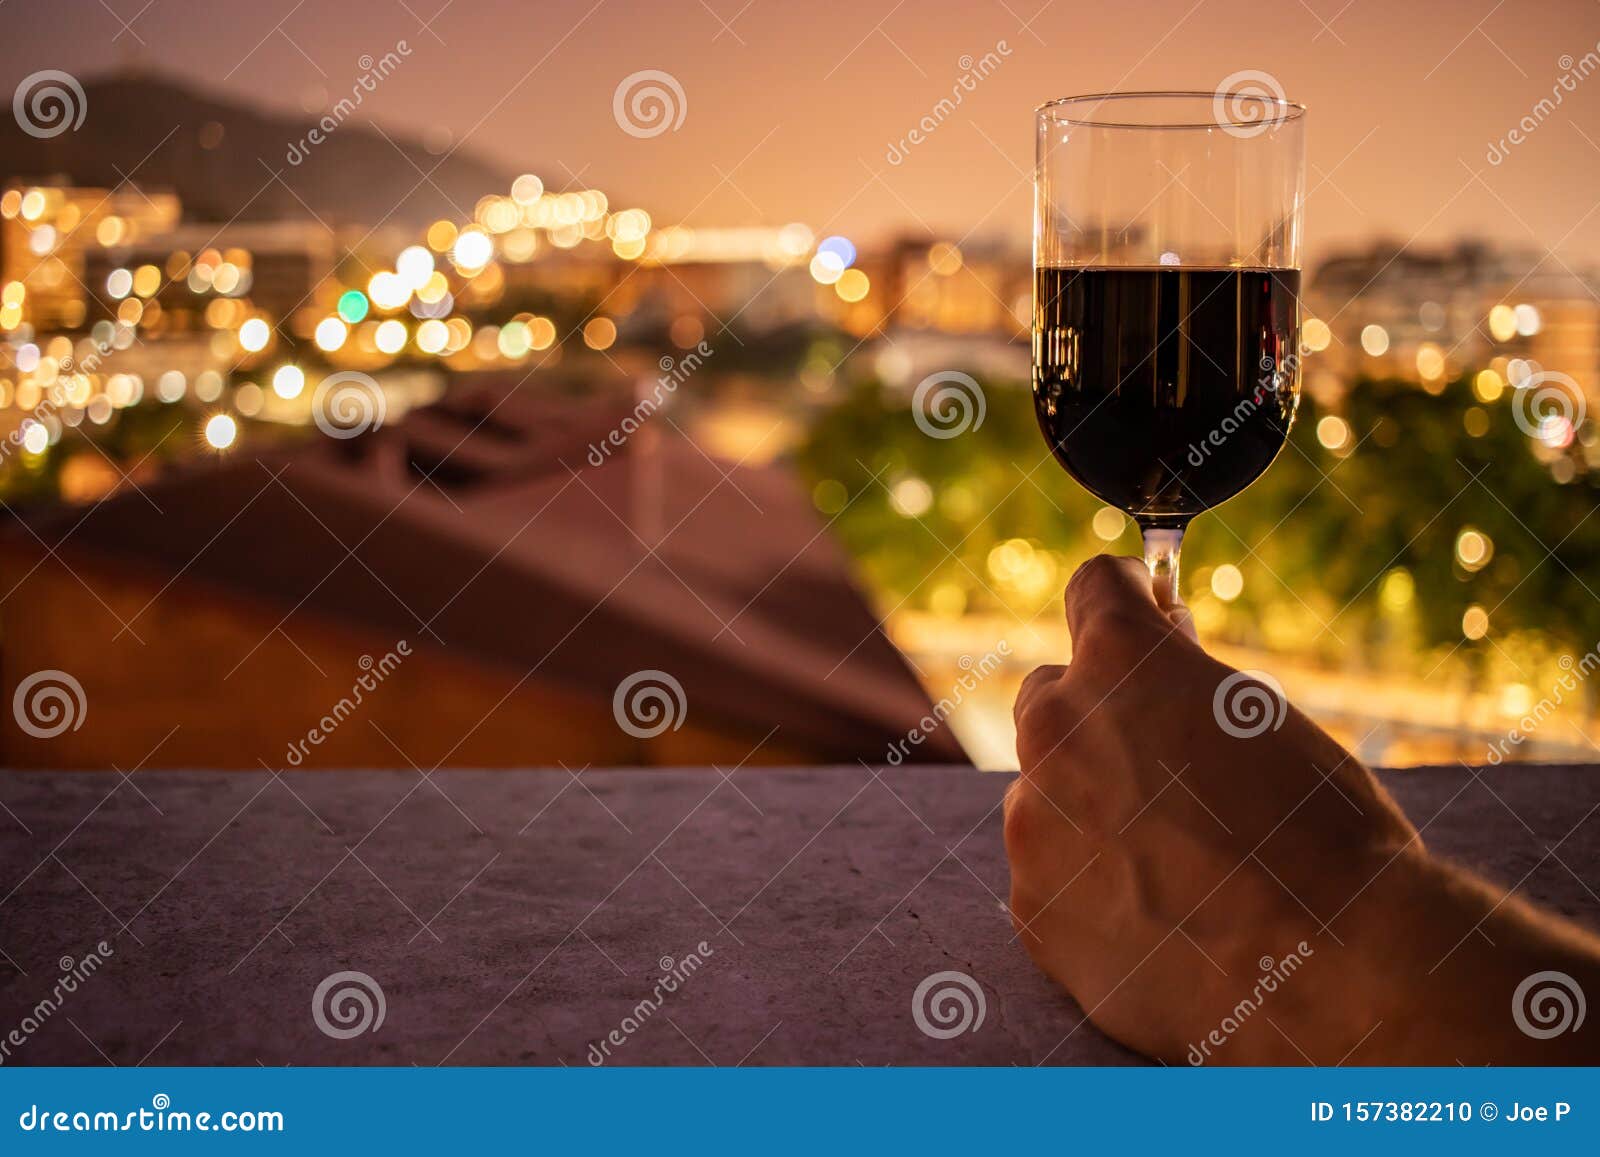 glass full of red wine held by a young male hand